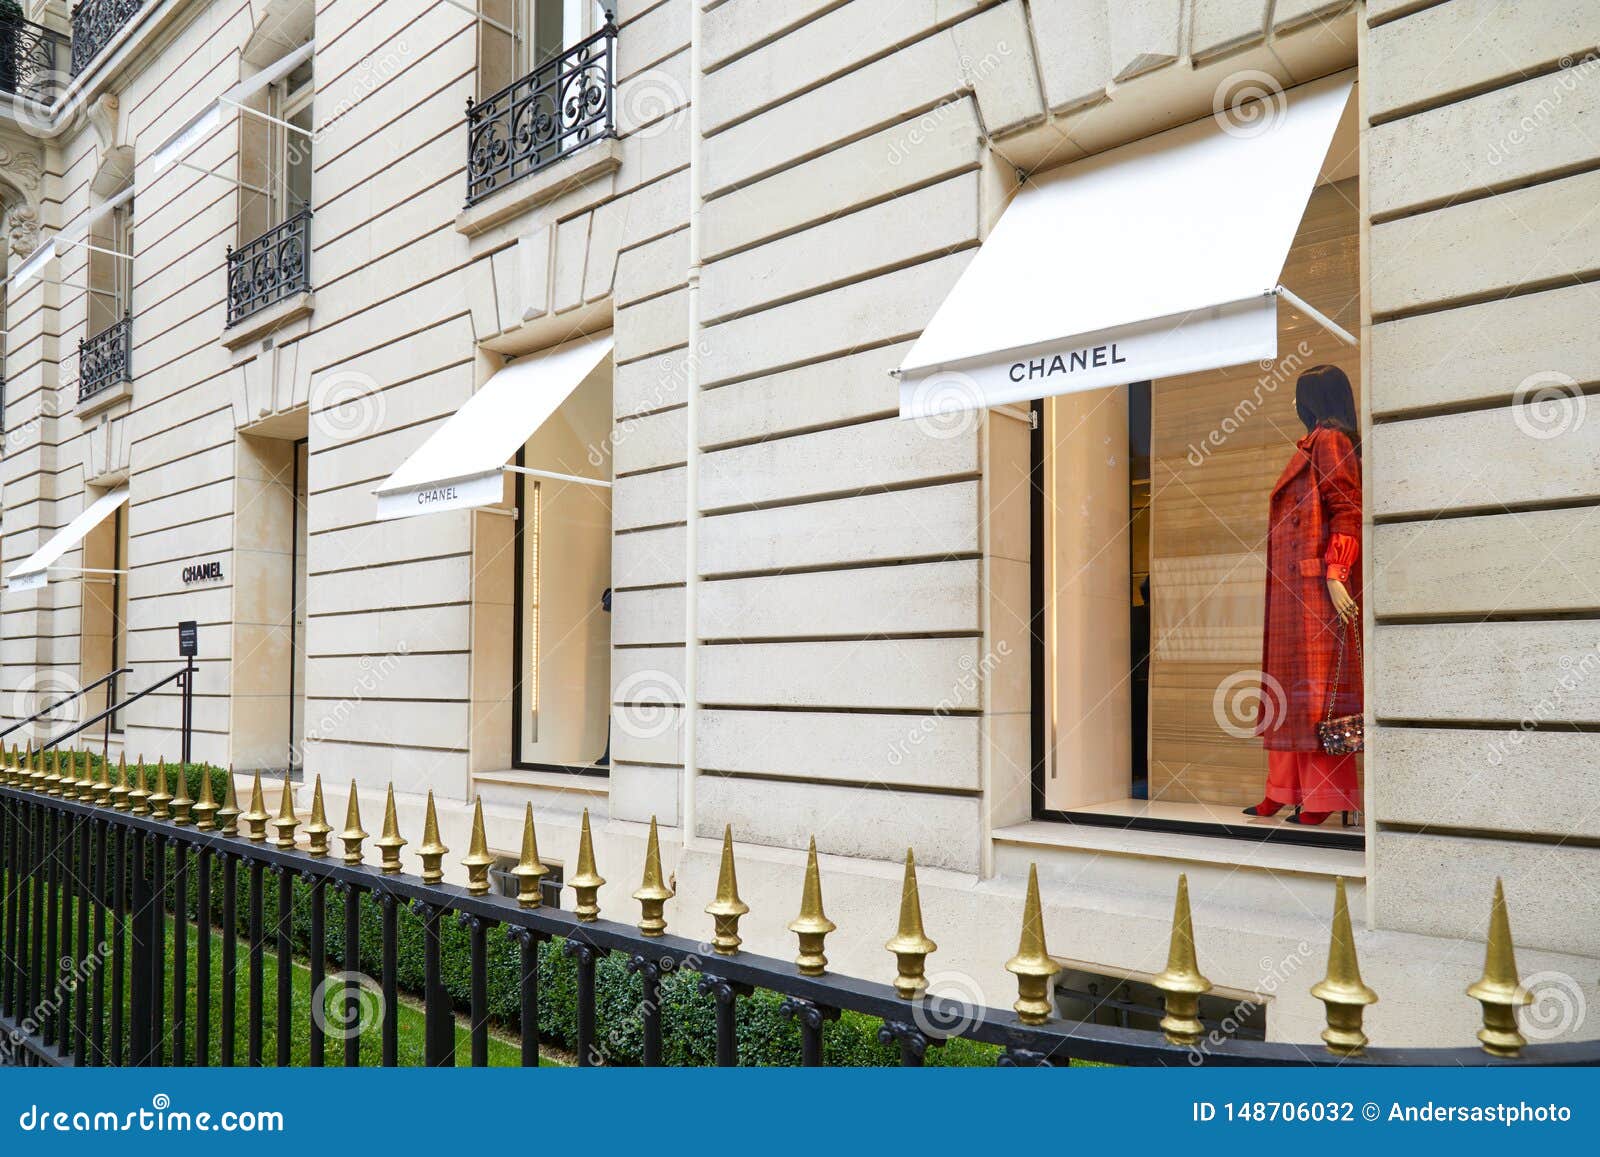 Chanel Fashion Luxury Store In Avenue Montaigne In Paris, France Editorial Photography - Image ...